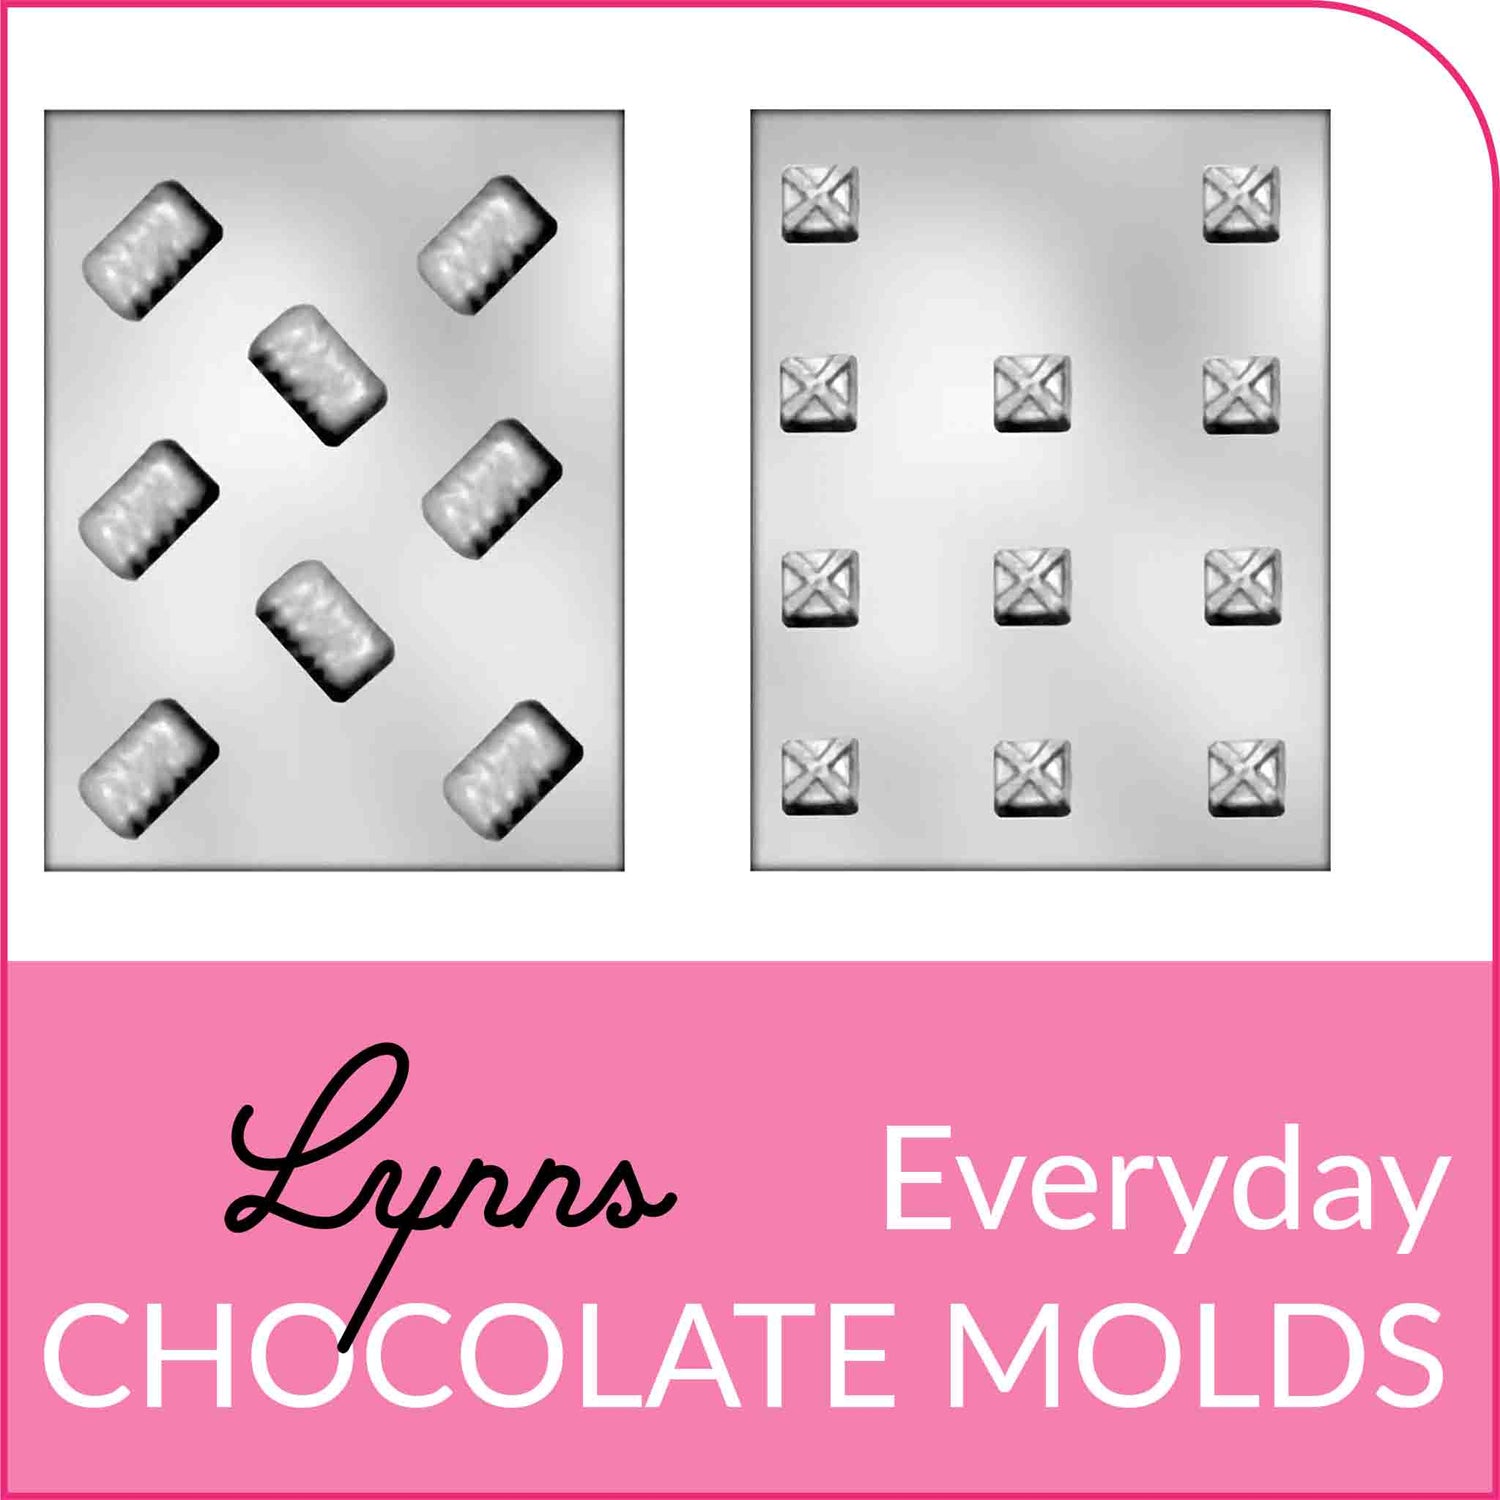 Shop Everyday Chocolate Mold Shapes for Lynn's